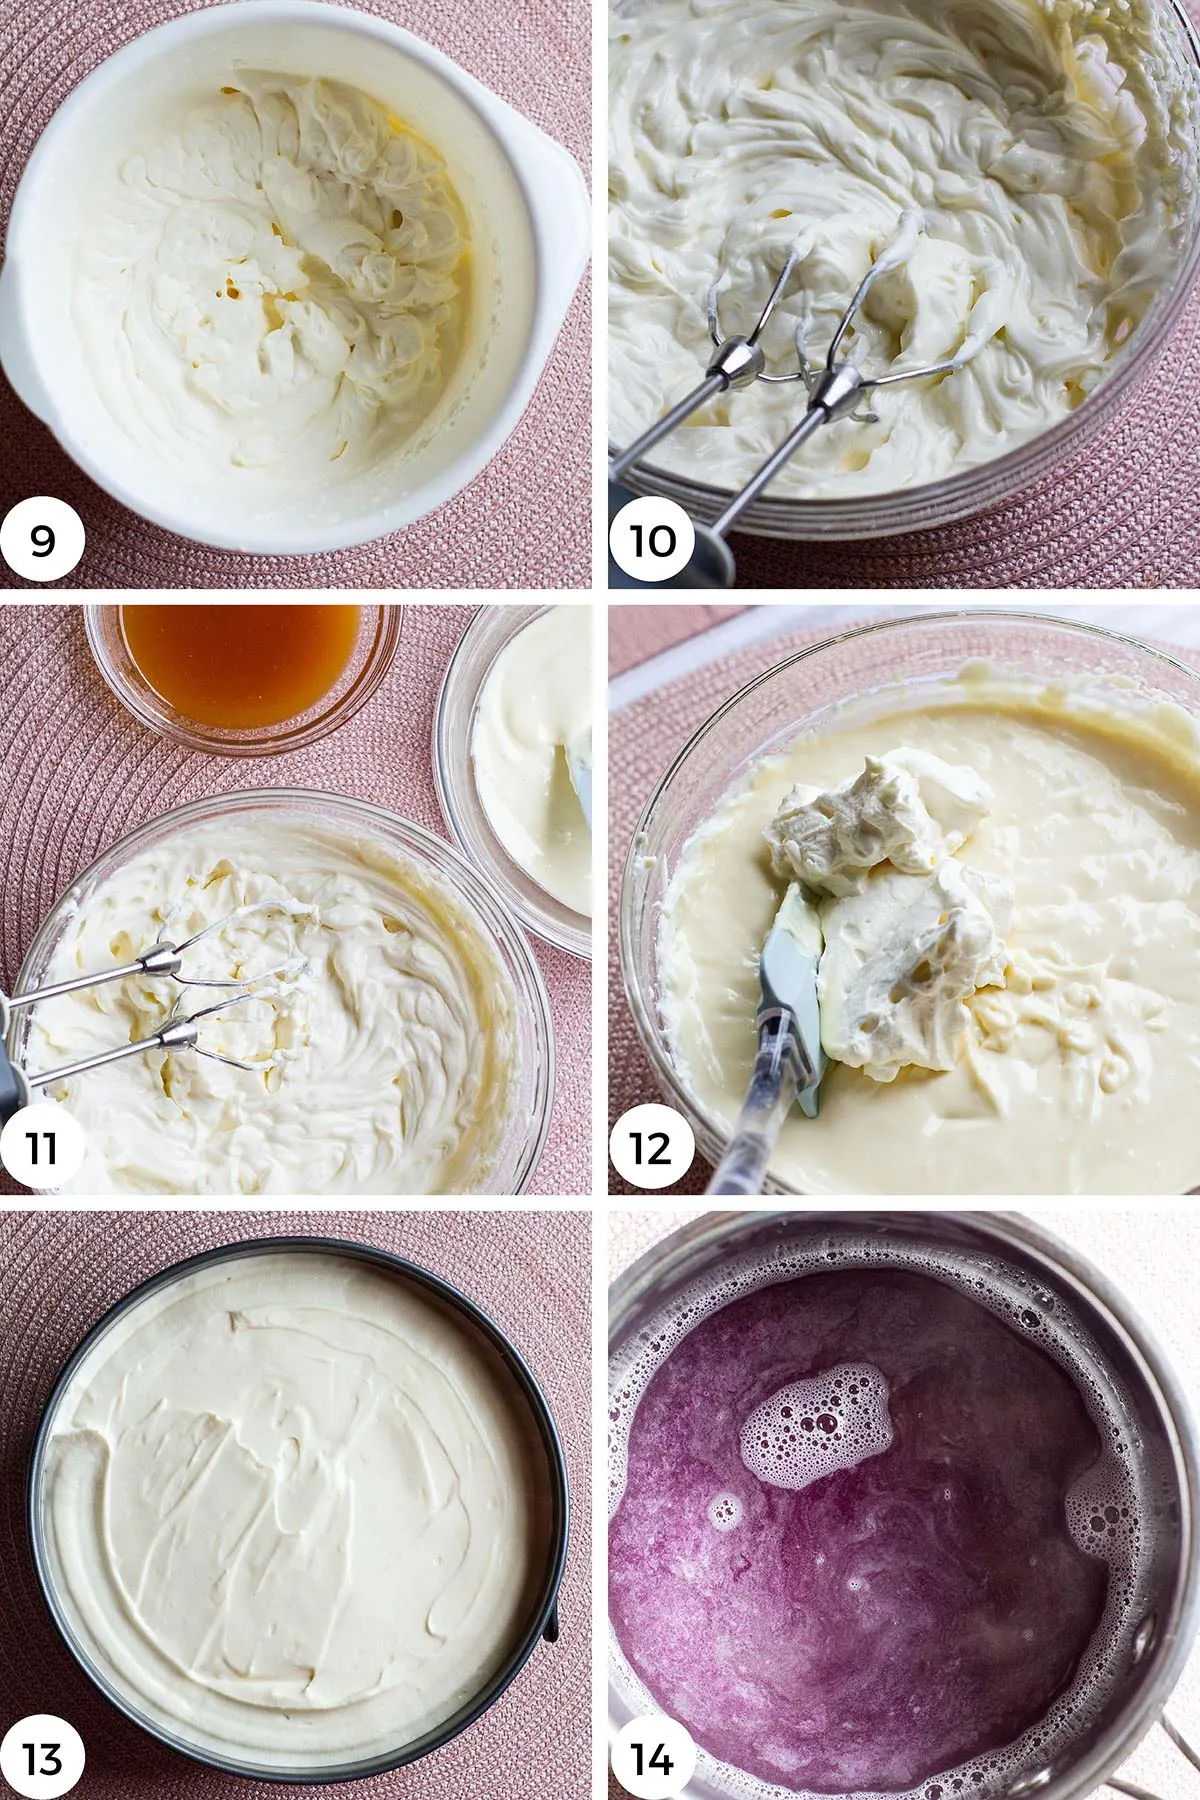 Steps to make the cheesecake.